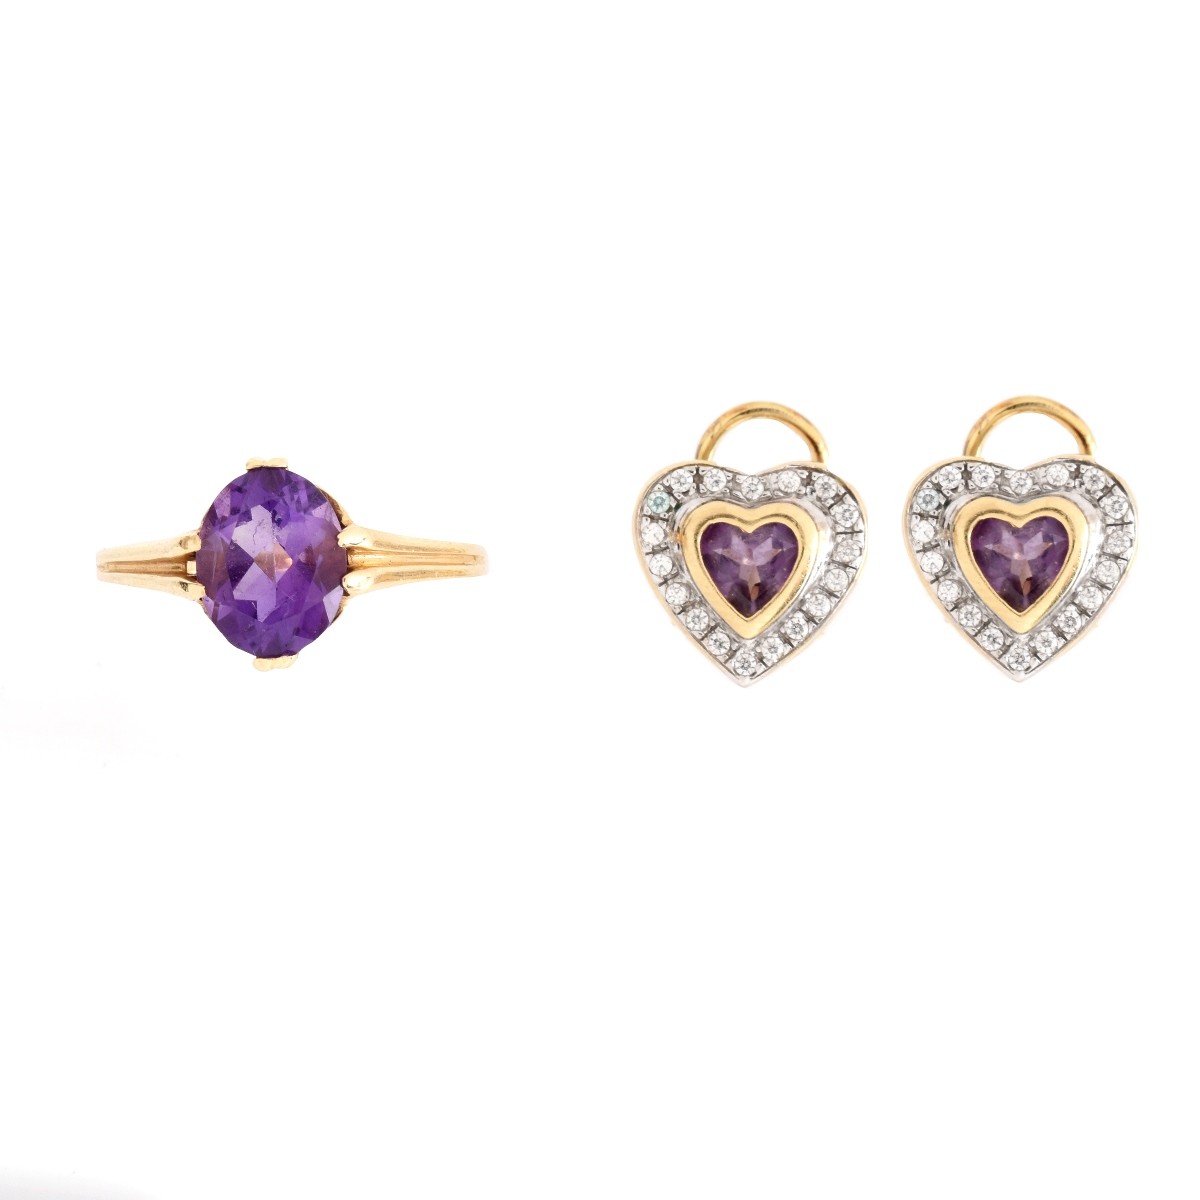 Vintage Amethyst and 14K Jewelry